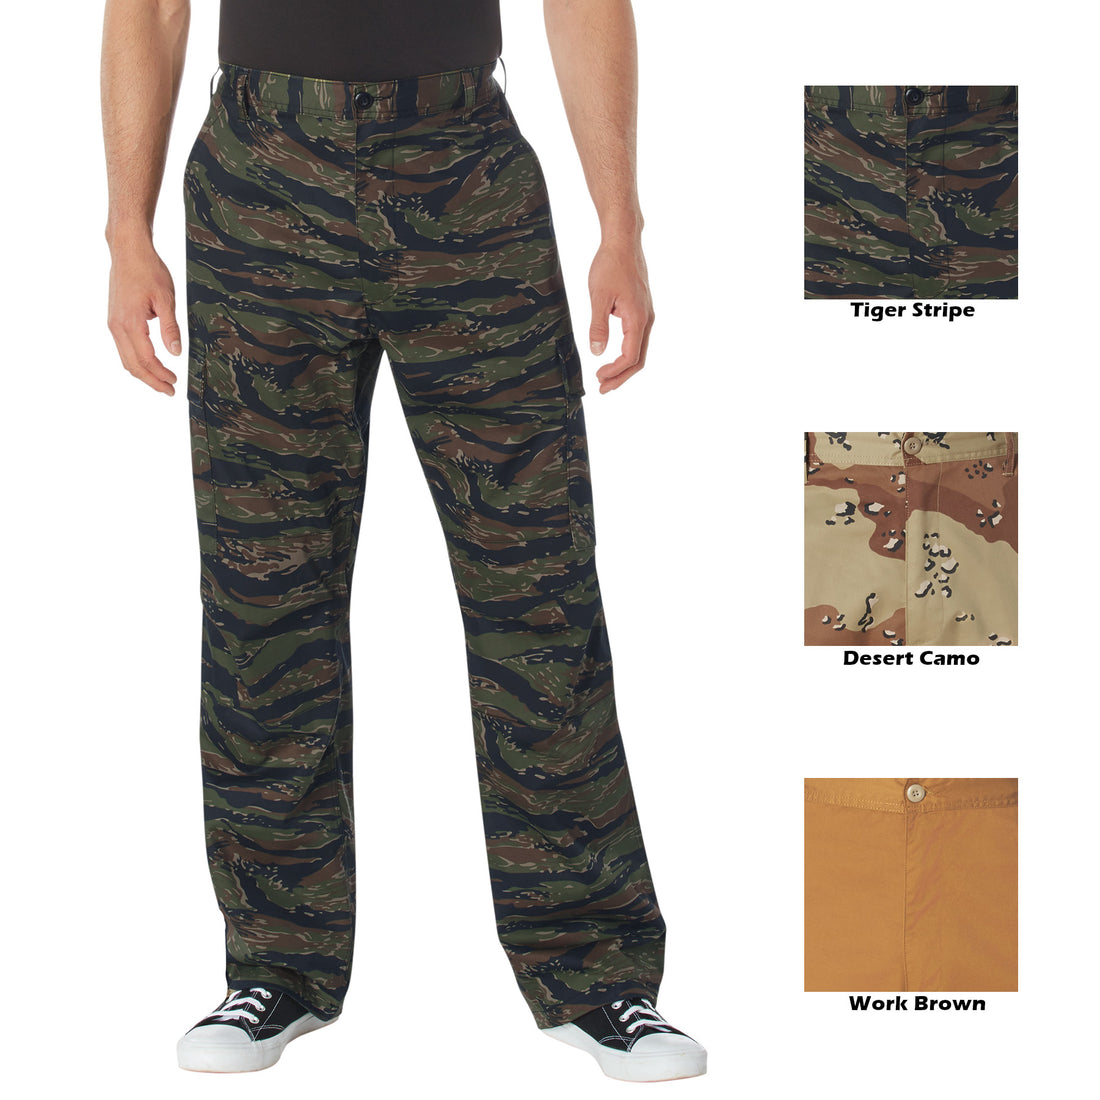 Rothco's Relaxed Fit Zipper Fly BDU Pants